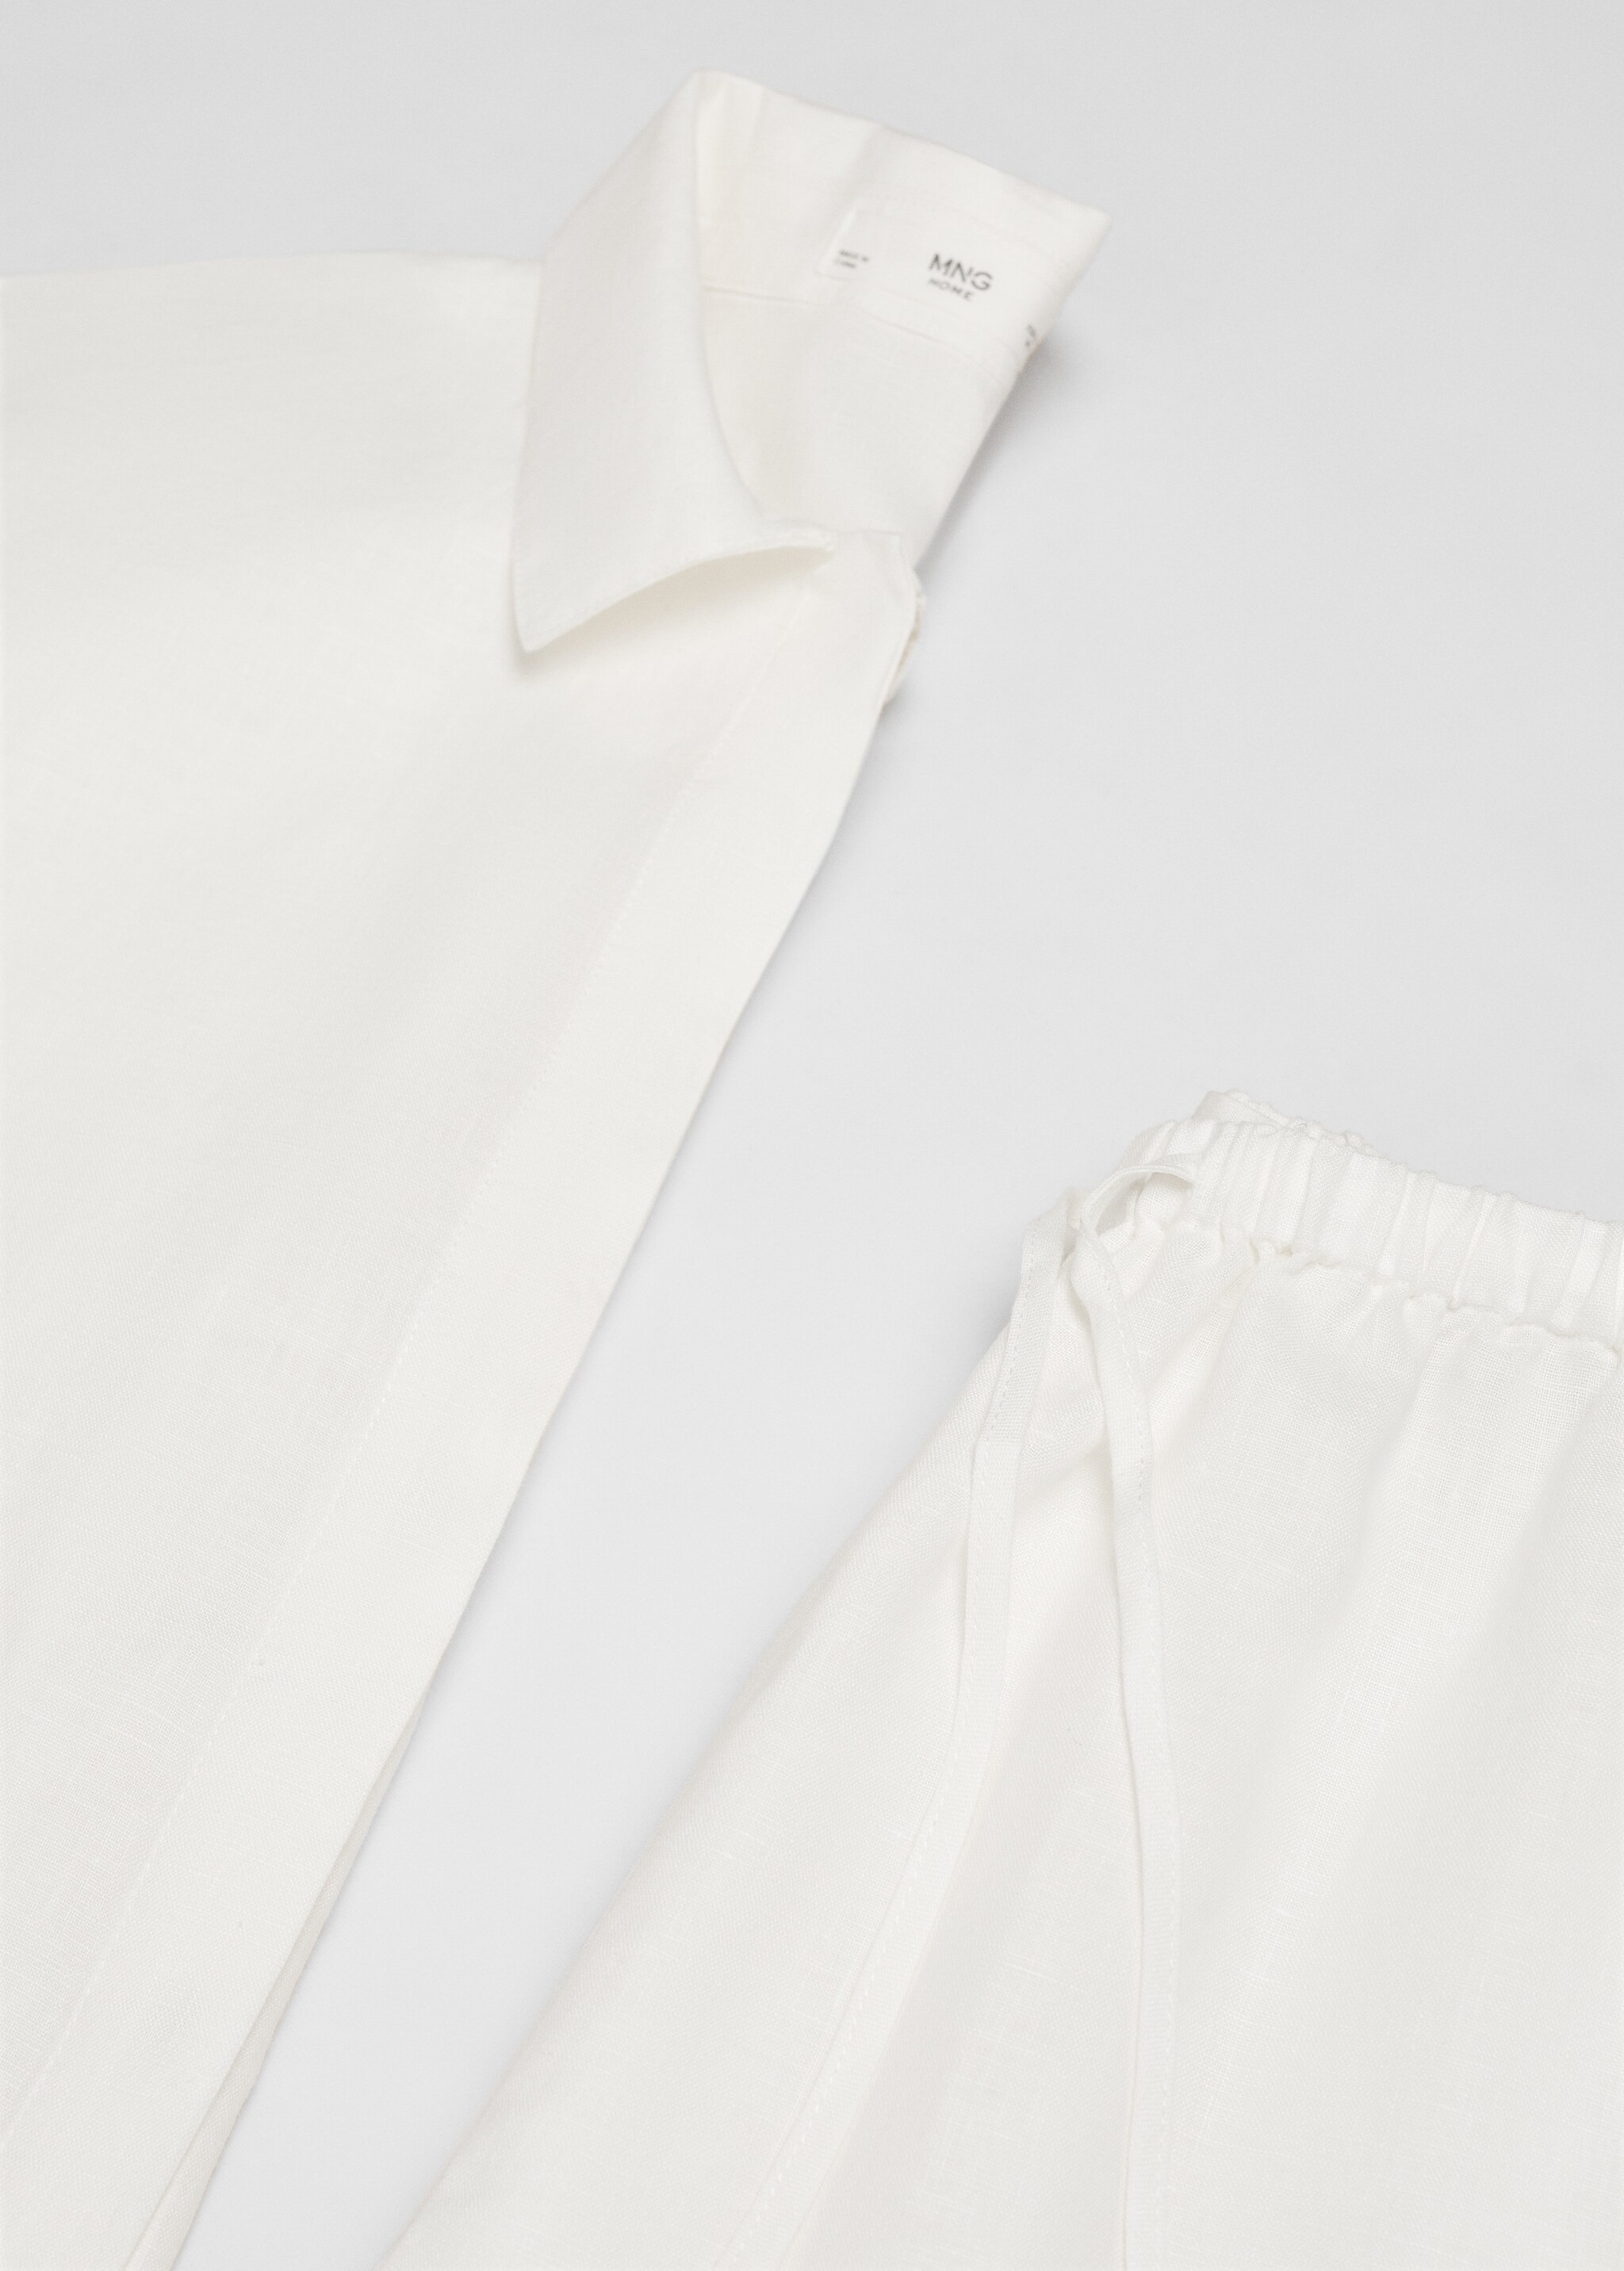 100% linen pyjama trousers - Details of the article 8